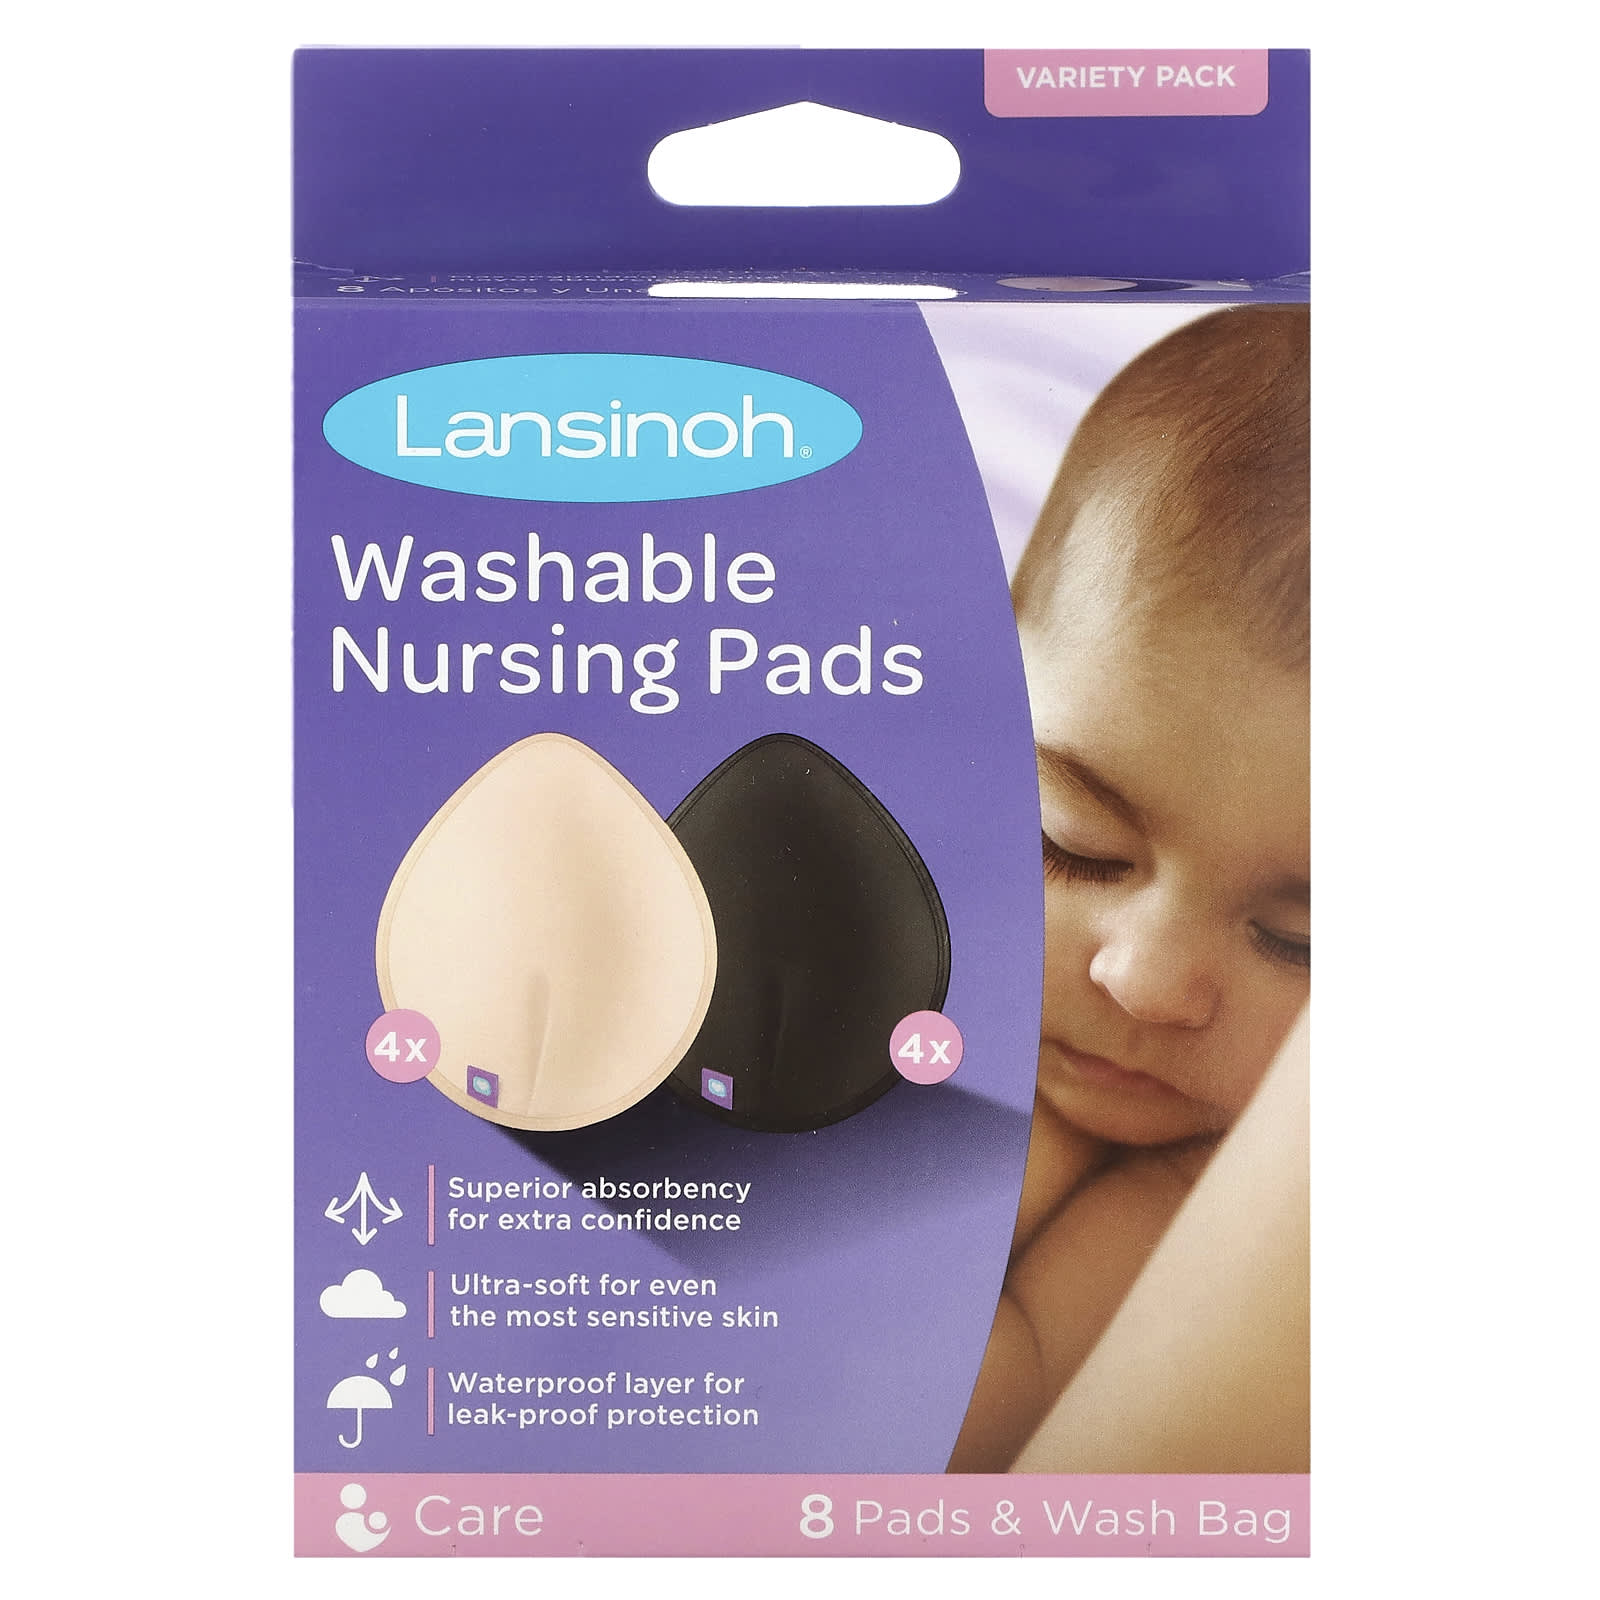 Nappy Bags 800 Pack & Lansinoh Disposable Breast Pads Pack of 60